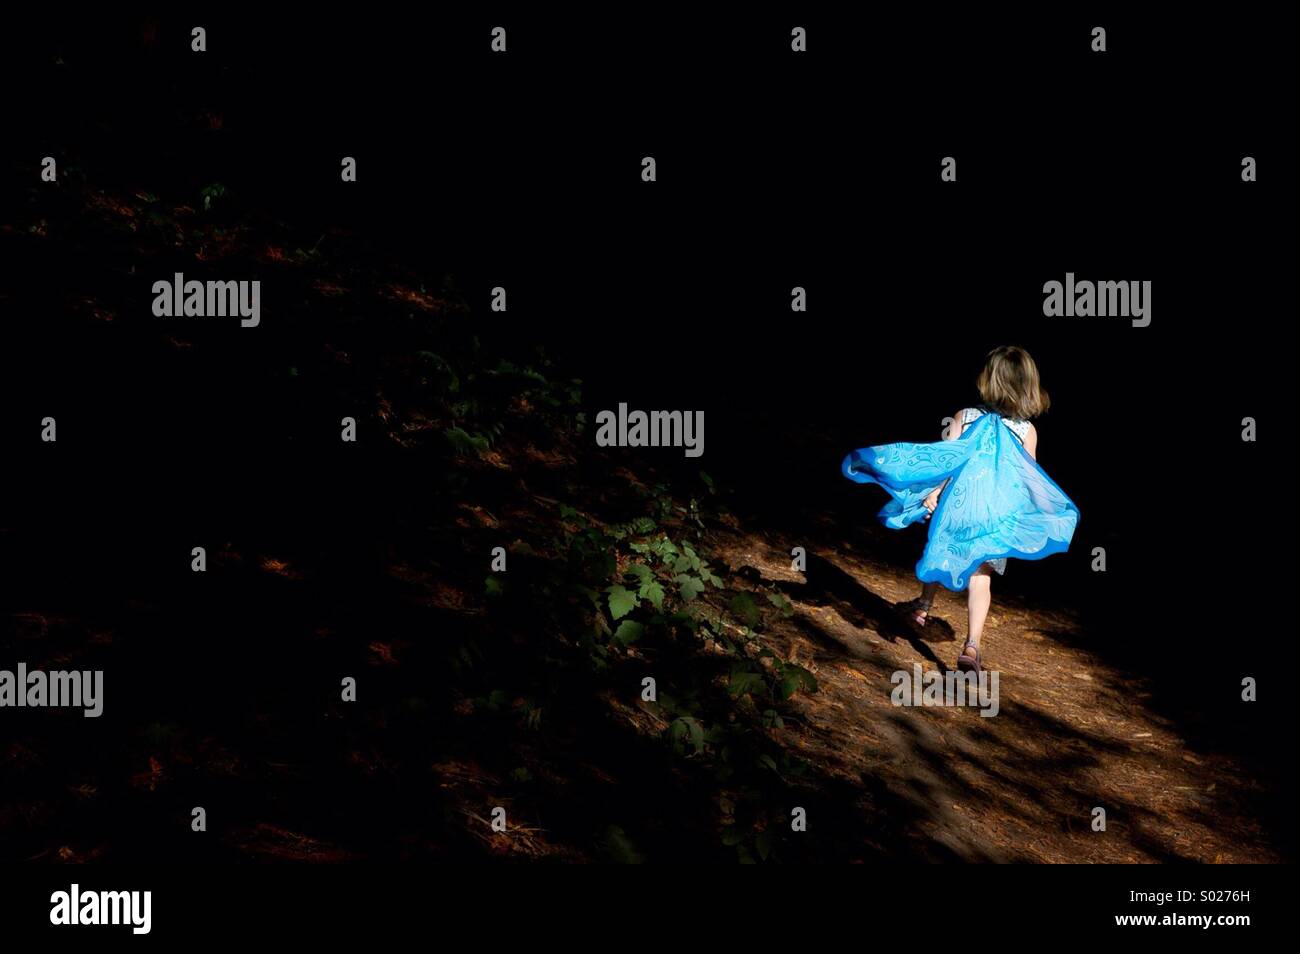 A little girl runs through the forest in a fairy costume. Stock Photo